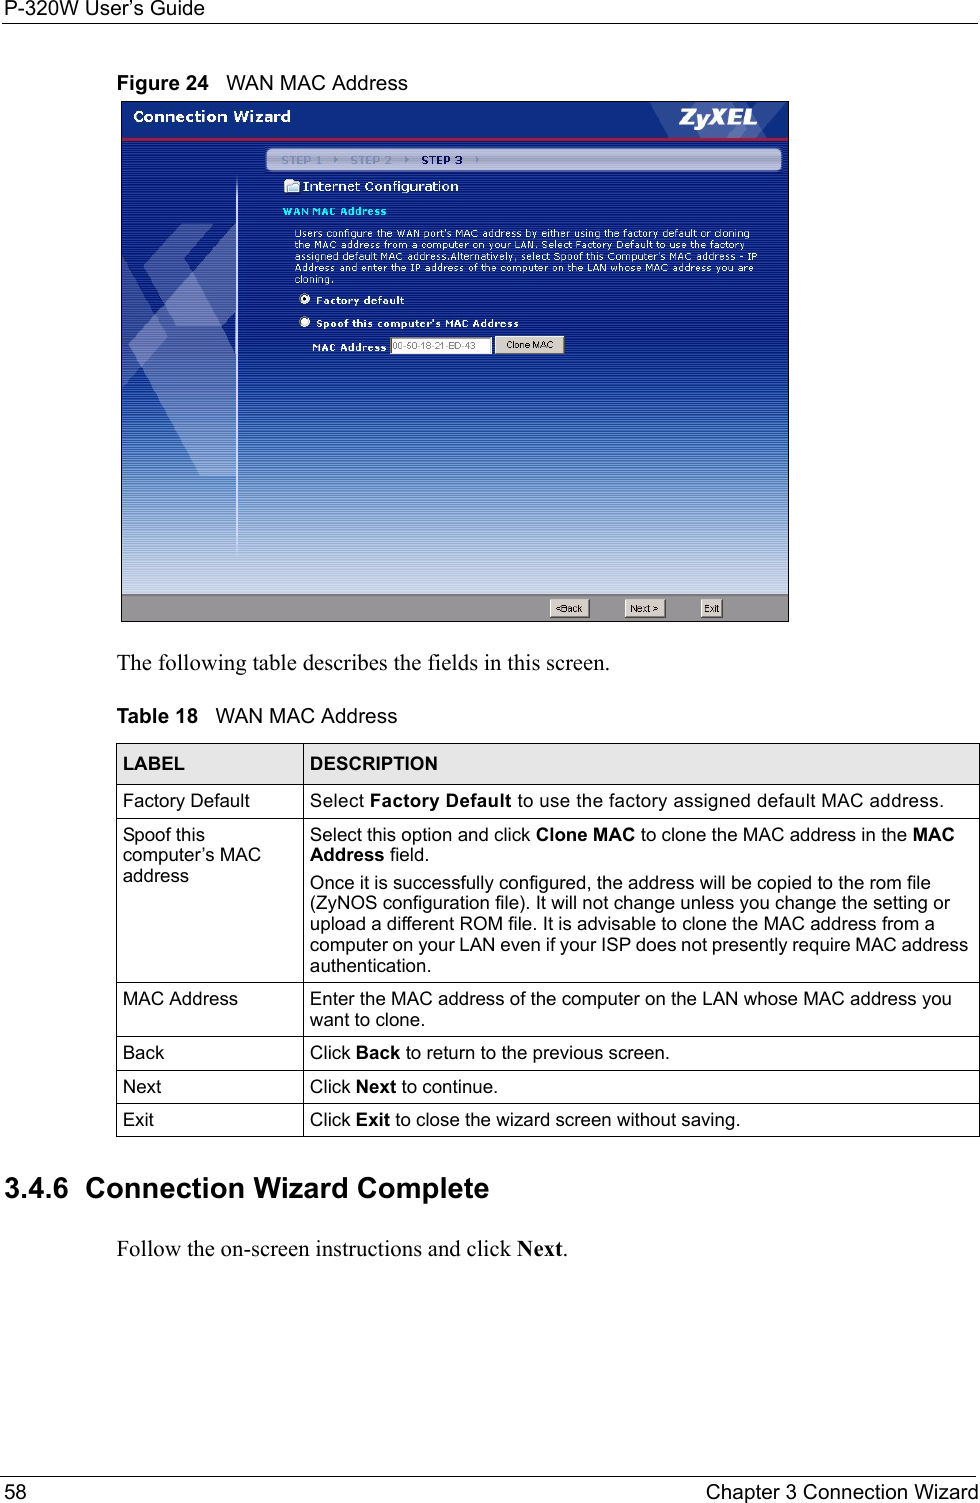 P-320W User’s Guide58  Chapter 3 Connection WizardFigure 24   WAN MAC AddressThe following table describes the fields in this screen.Table 18   WAN MAC AddressLABEL DESCRIPTIONFactory Default Select Factory Default to use the factory assigned default MAC address.  Spoof this computer’s MAC addressSelect this option and click Clone MAC to clone the MAC address in the MAC Address field.  Once it is successfully configured, the address will be copied to the rom file (ZyNOS configuration file). It will not change unless you change the setting or upload a different ROM file. It is advisable to clone the MAC address from a computer on your LAN even if your ISP does not presently require MAC address authentication.MAC Address Enter the MAC address of the computer on the LAN whose MAC address you want to clone.Back Click Back to return to the previous screen.Next Click Next to continue. Exit Click Exit to close the wizard screen without saving.3.4.6  Connection Wizard CompleteFollow the on-screen instructions and click Next. 